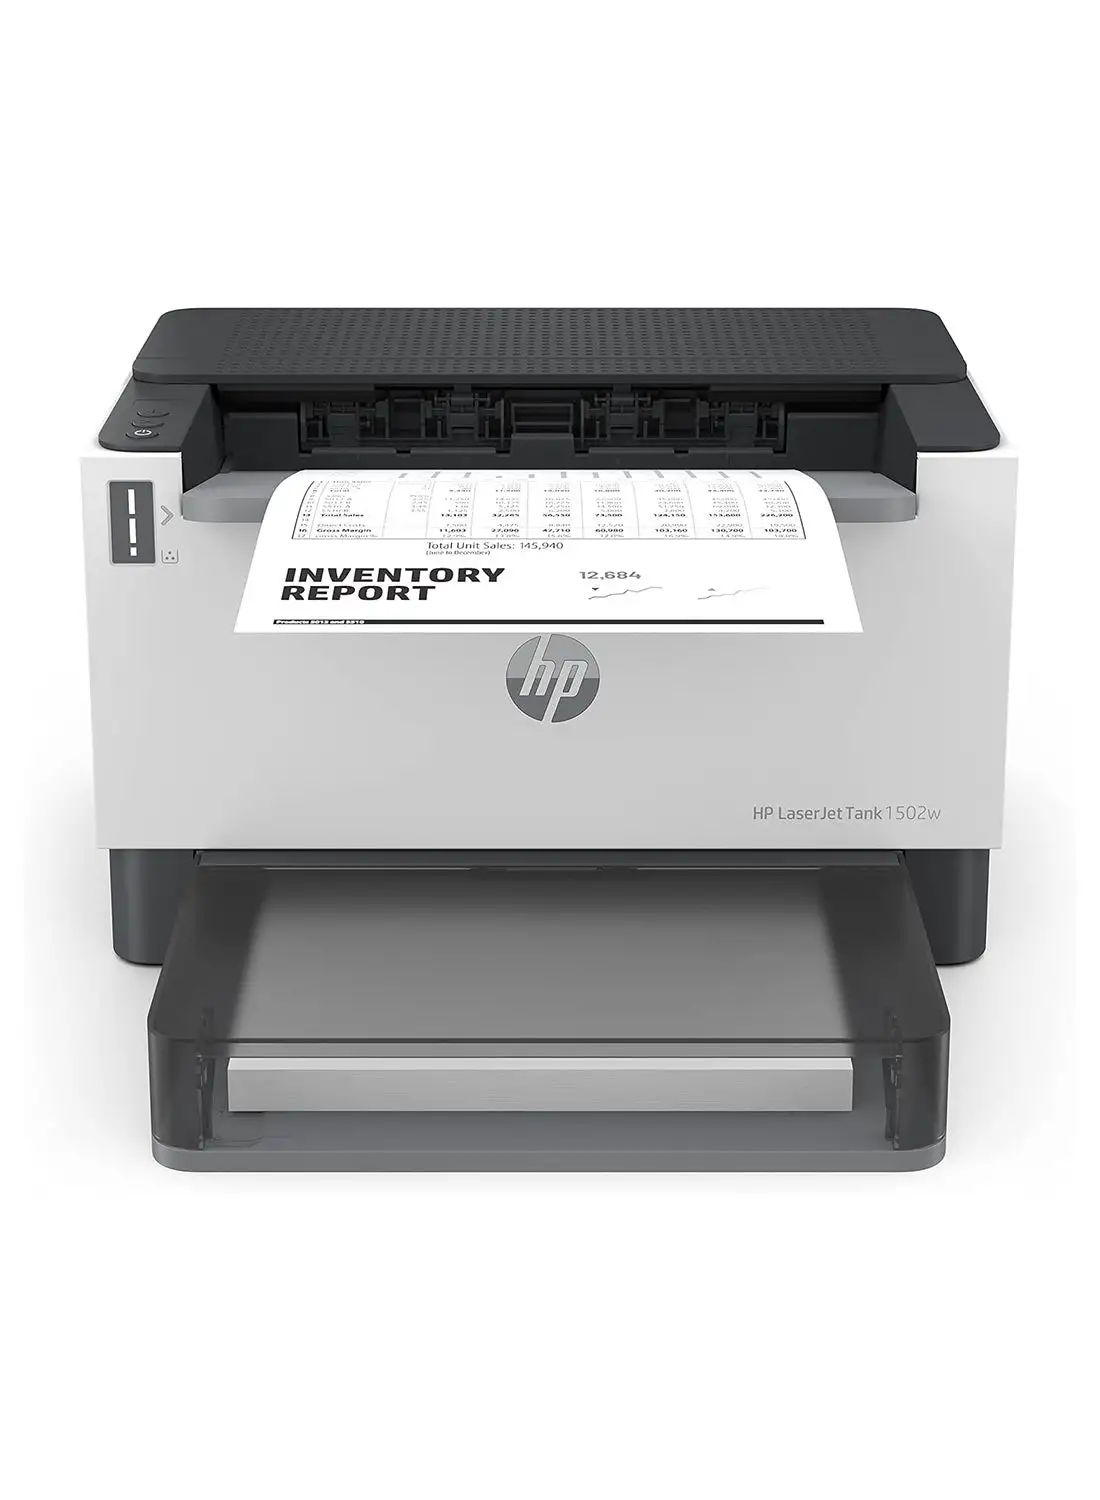 HP LaserJet Tank 1502w Printer - Black and white, Compact Size; Energy Efficient, Dualband Wi-Fi; Up to 20,000 pages per month duty cycle White